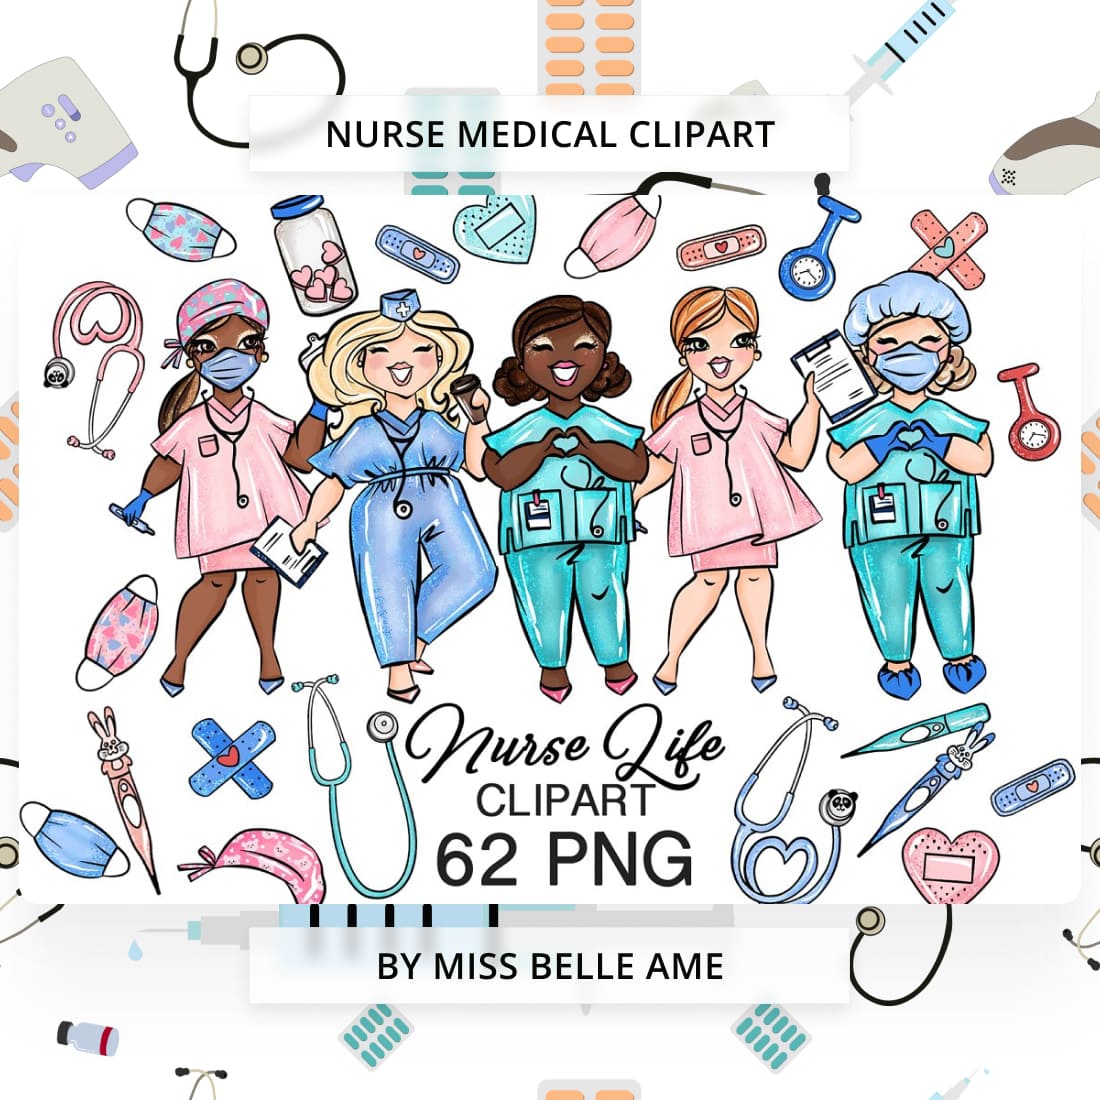 nurse medical clipart cover image.